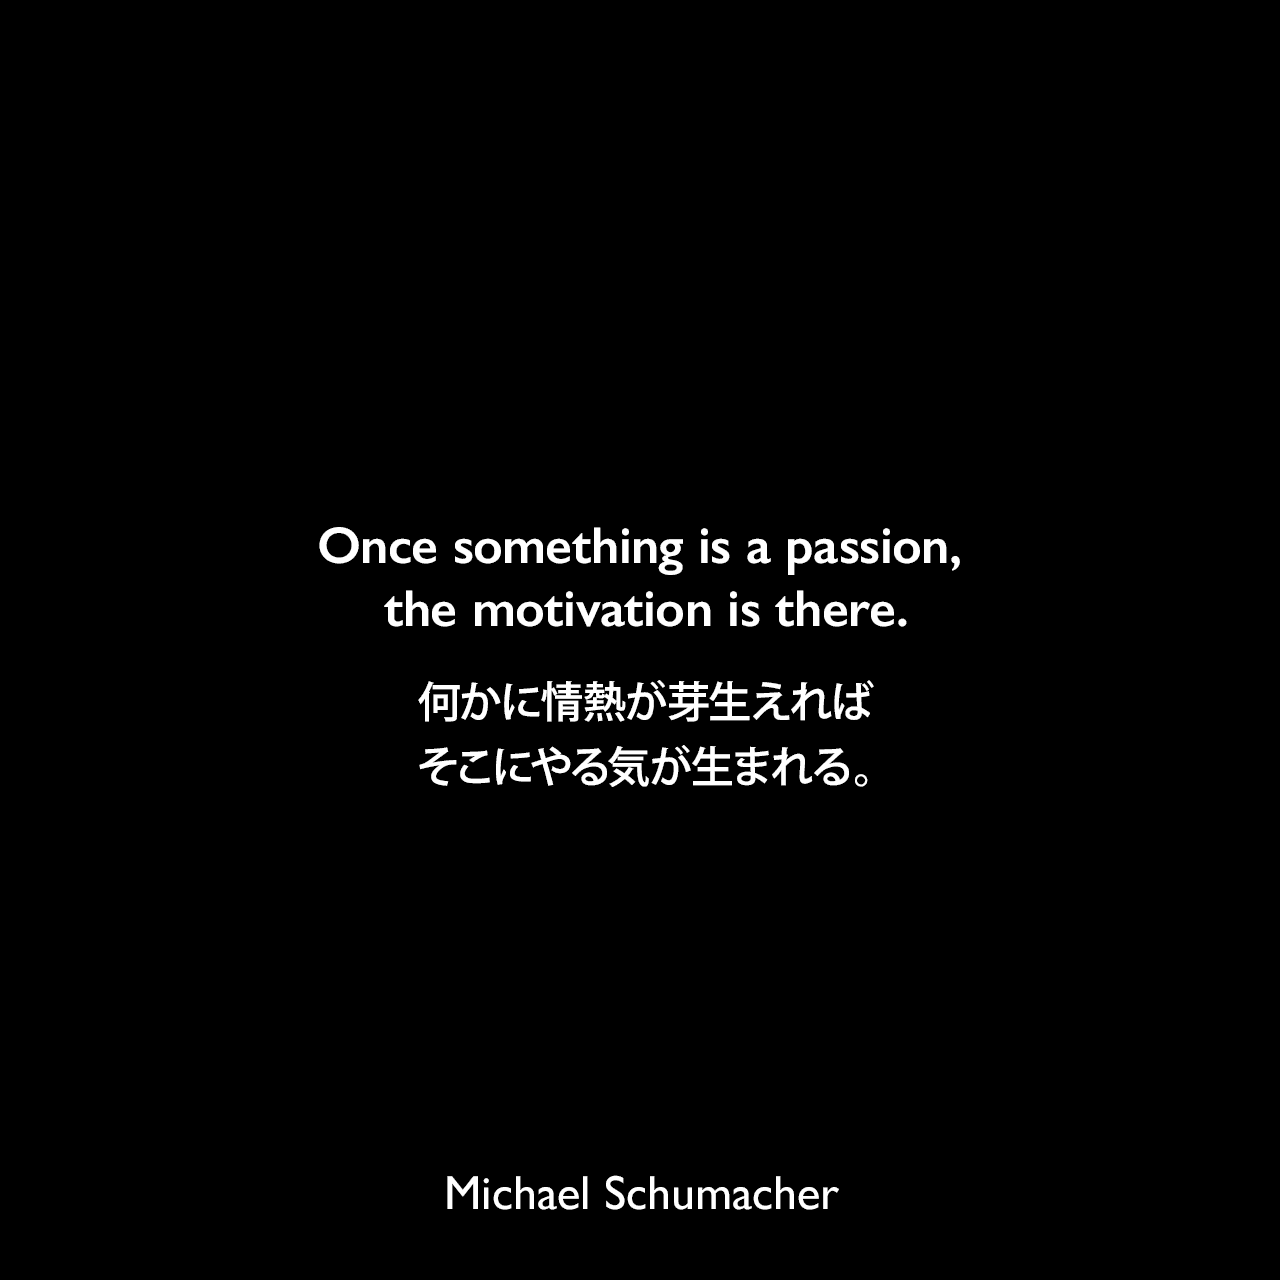 Once something is a passion, the motivation is there.何かに情熱が芽生えれば、そこにやる気が生まれる。Michael Schumacher